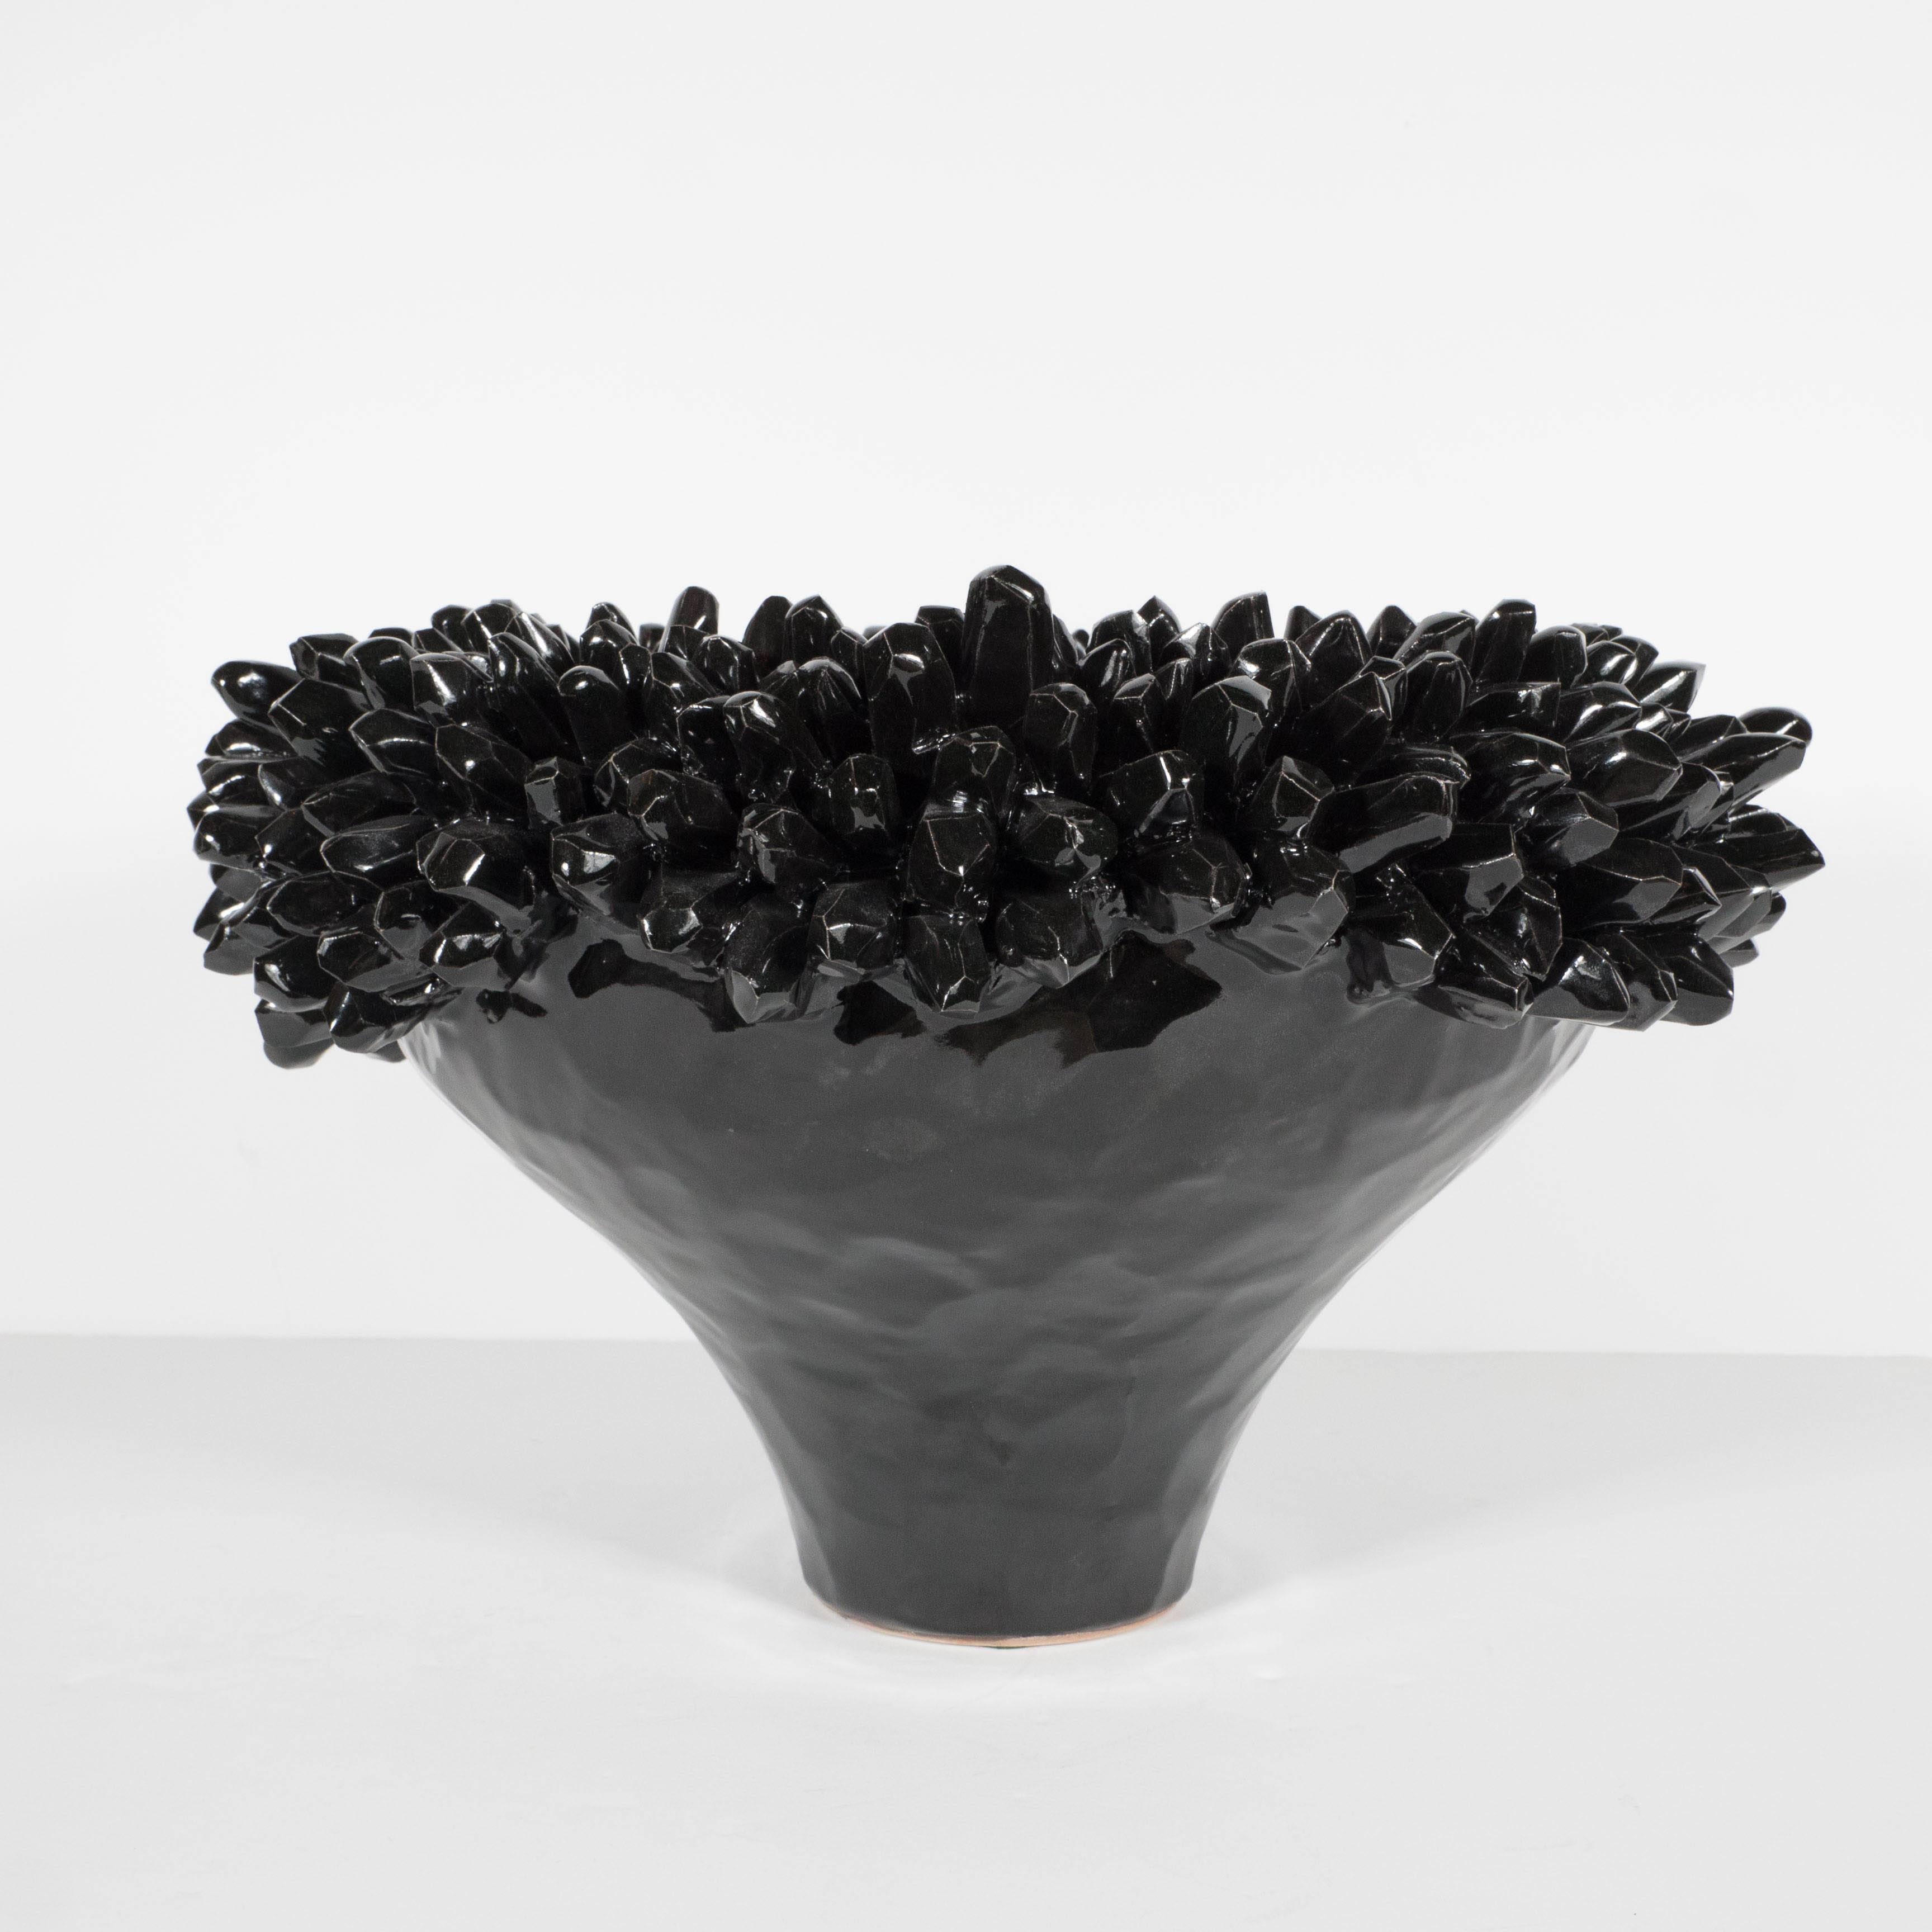 A Mid-Century ceramic bowl in a glazed jet black. The spiky details along the perimeter resemble that of a sea urchin. This piece is in excellent condition. A wonderful accent or centerpiece bowl.